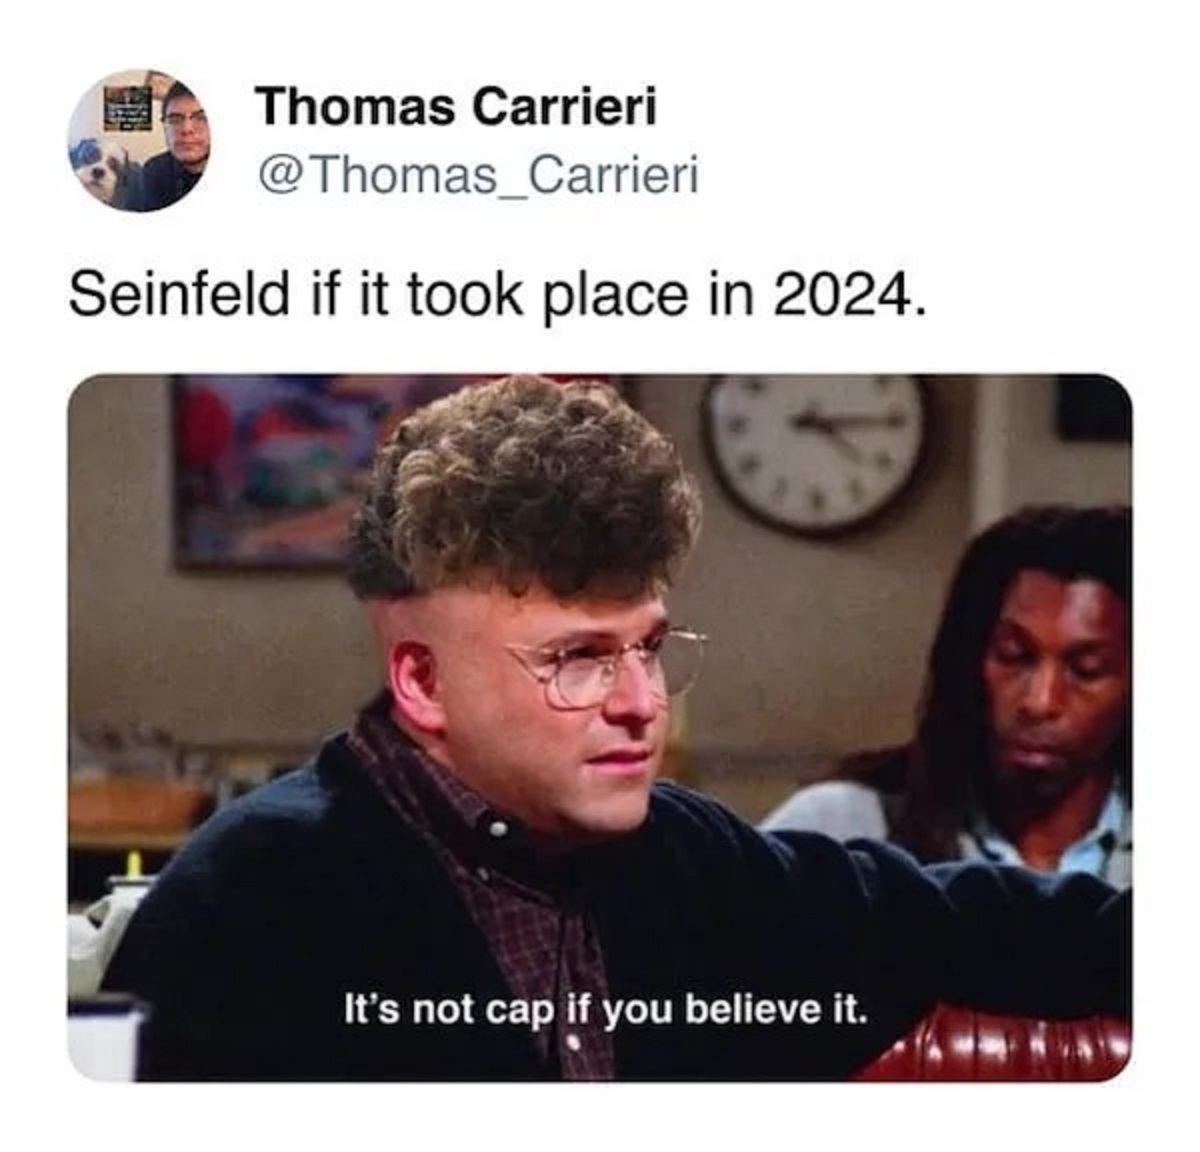 photo caption - Thomas Carrieri Seinfeld if it took place in 2024. It's not cap if you believe it.